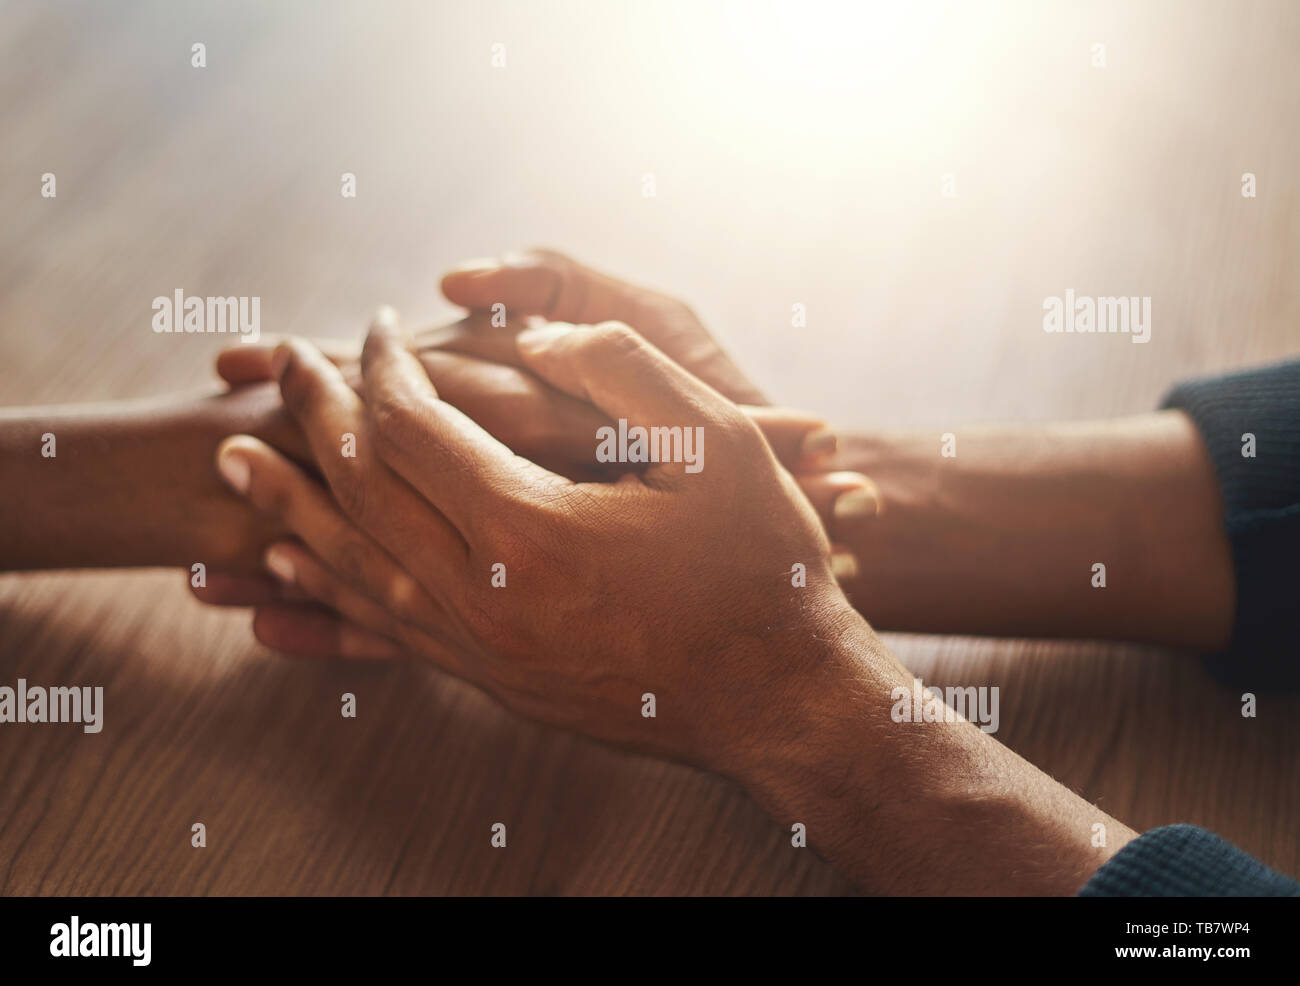 Couple's hand holding hands on wooden desk Stock Photo